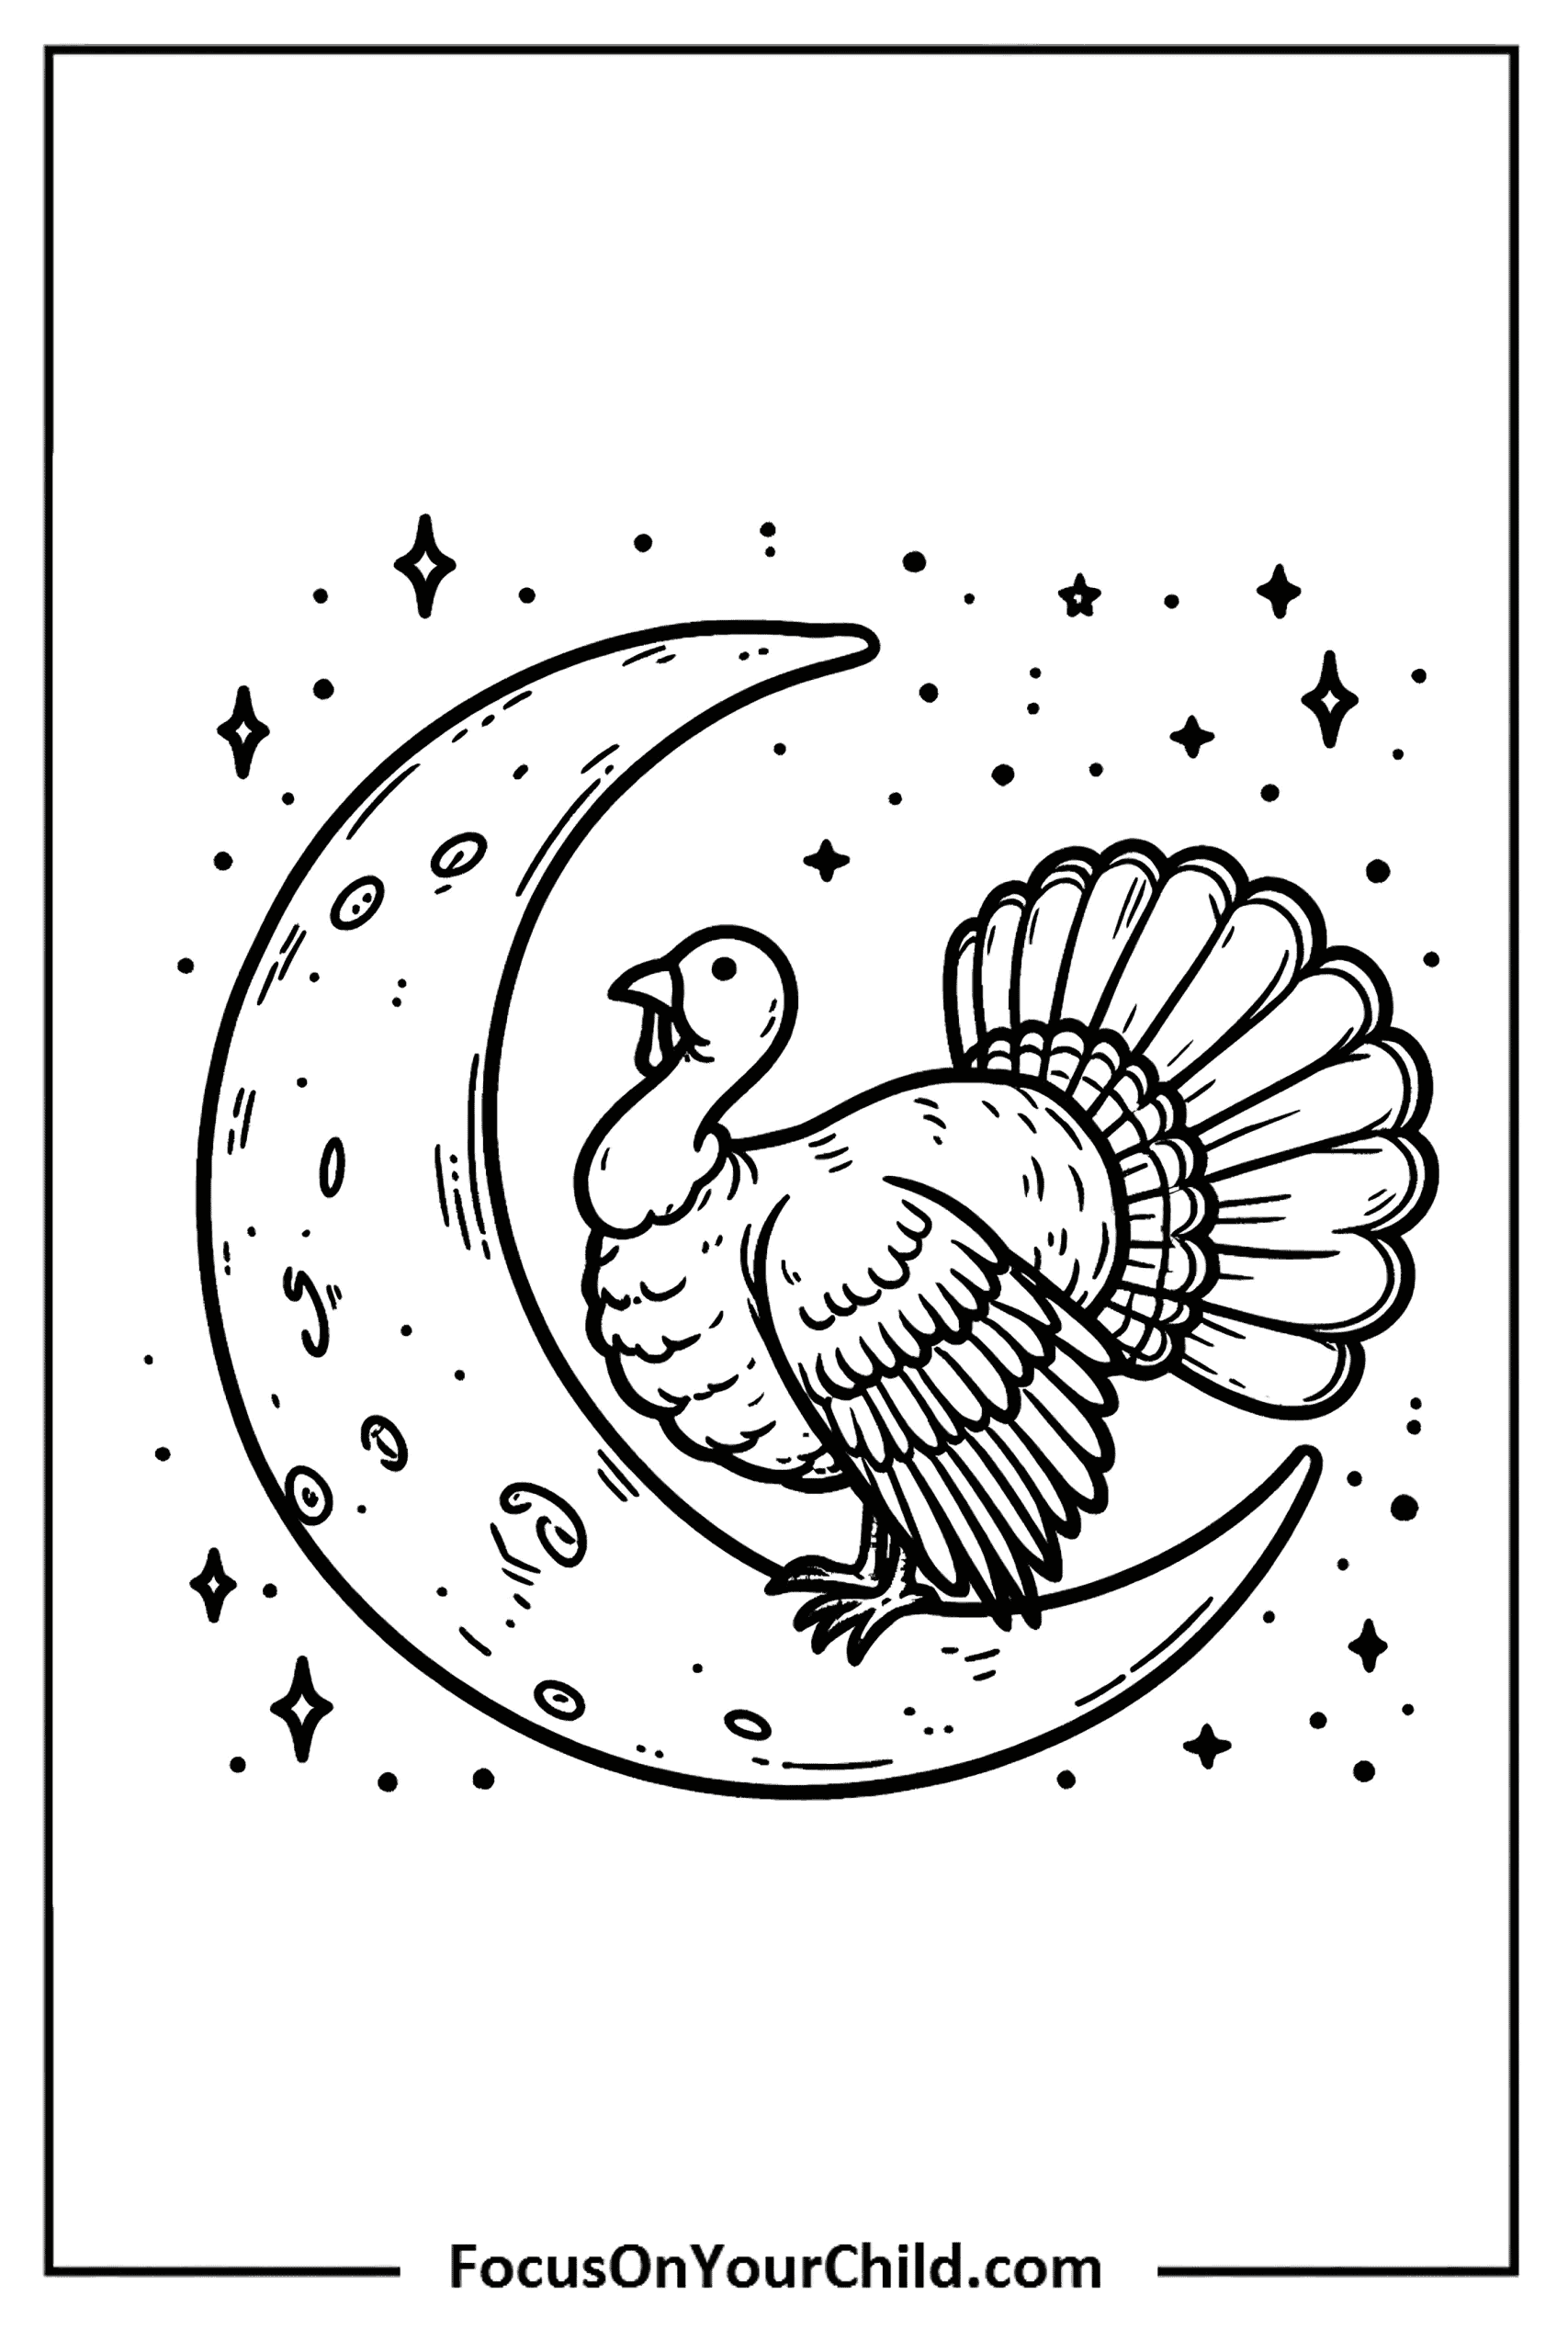 Whimsical turkey perched on textured crescent moon in starry night sky.